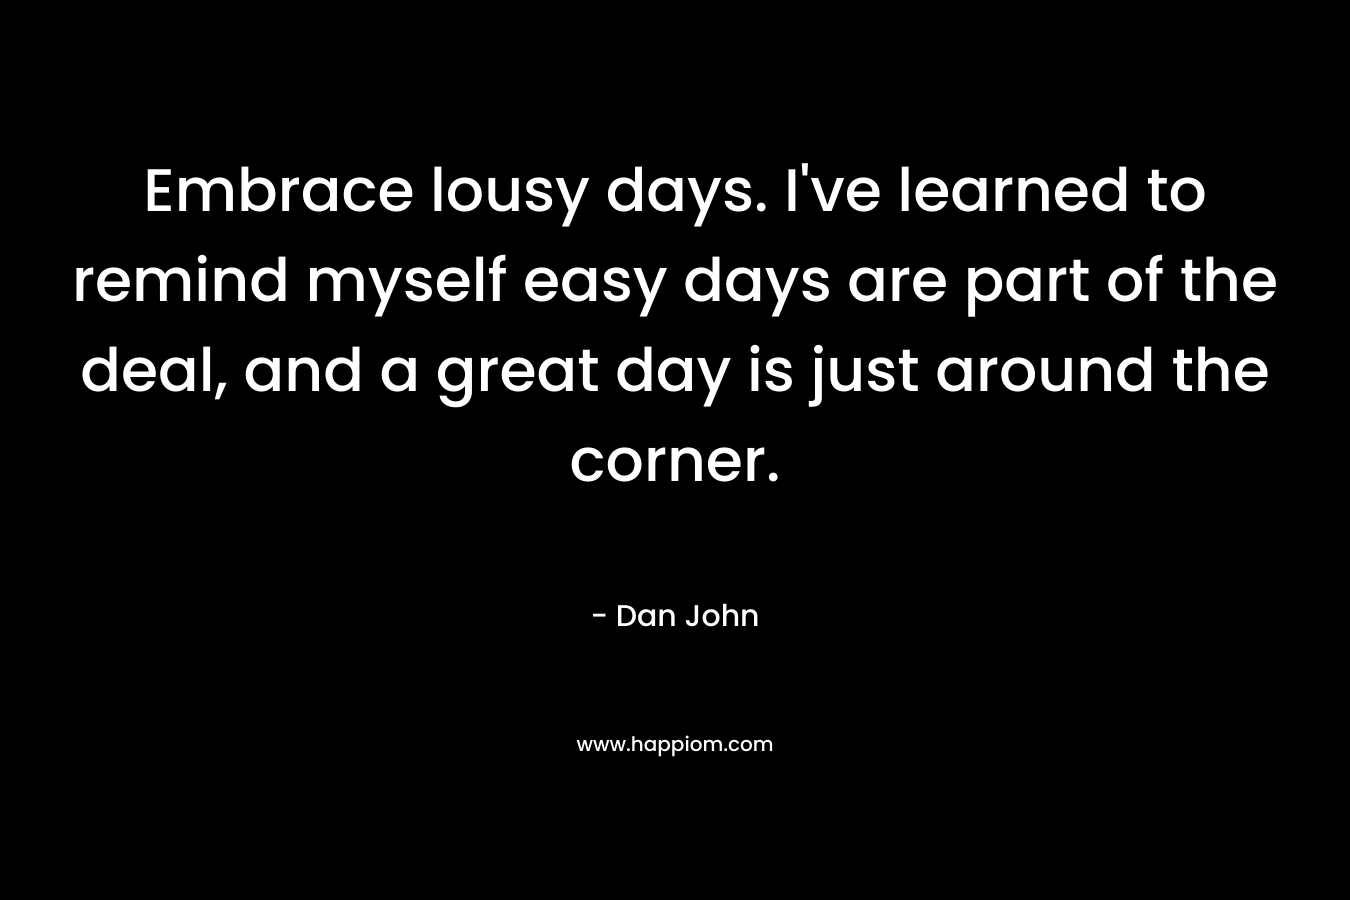 Embrace lousy days. I've learned to remind myself easy days are part of the deal, and a great day is just around the corner.